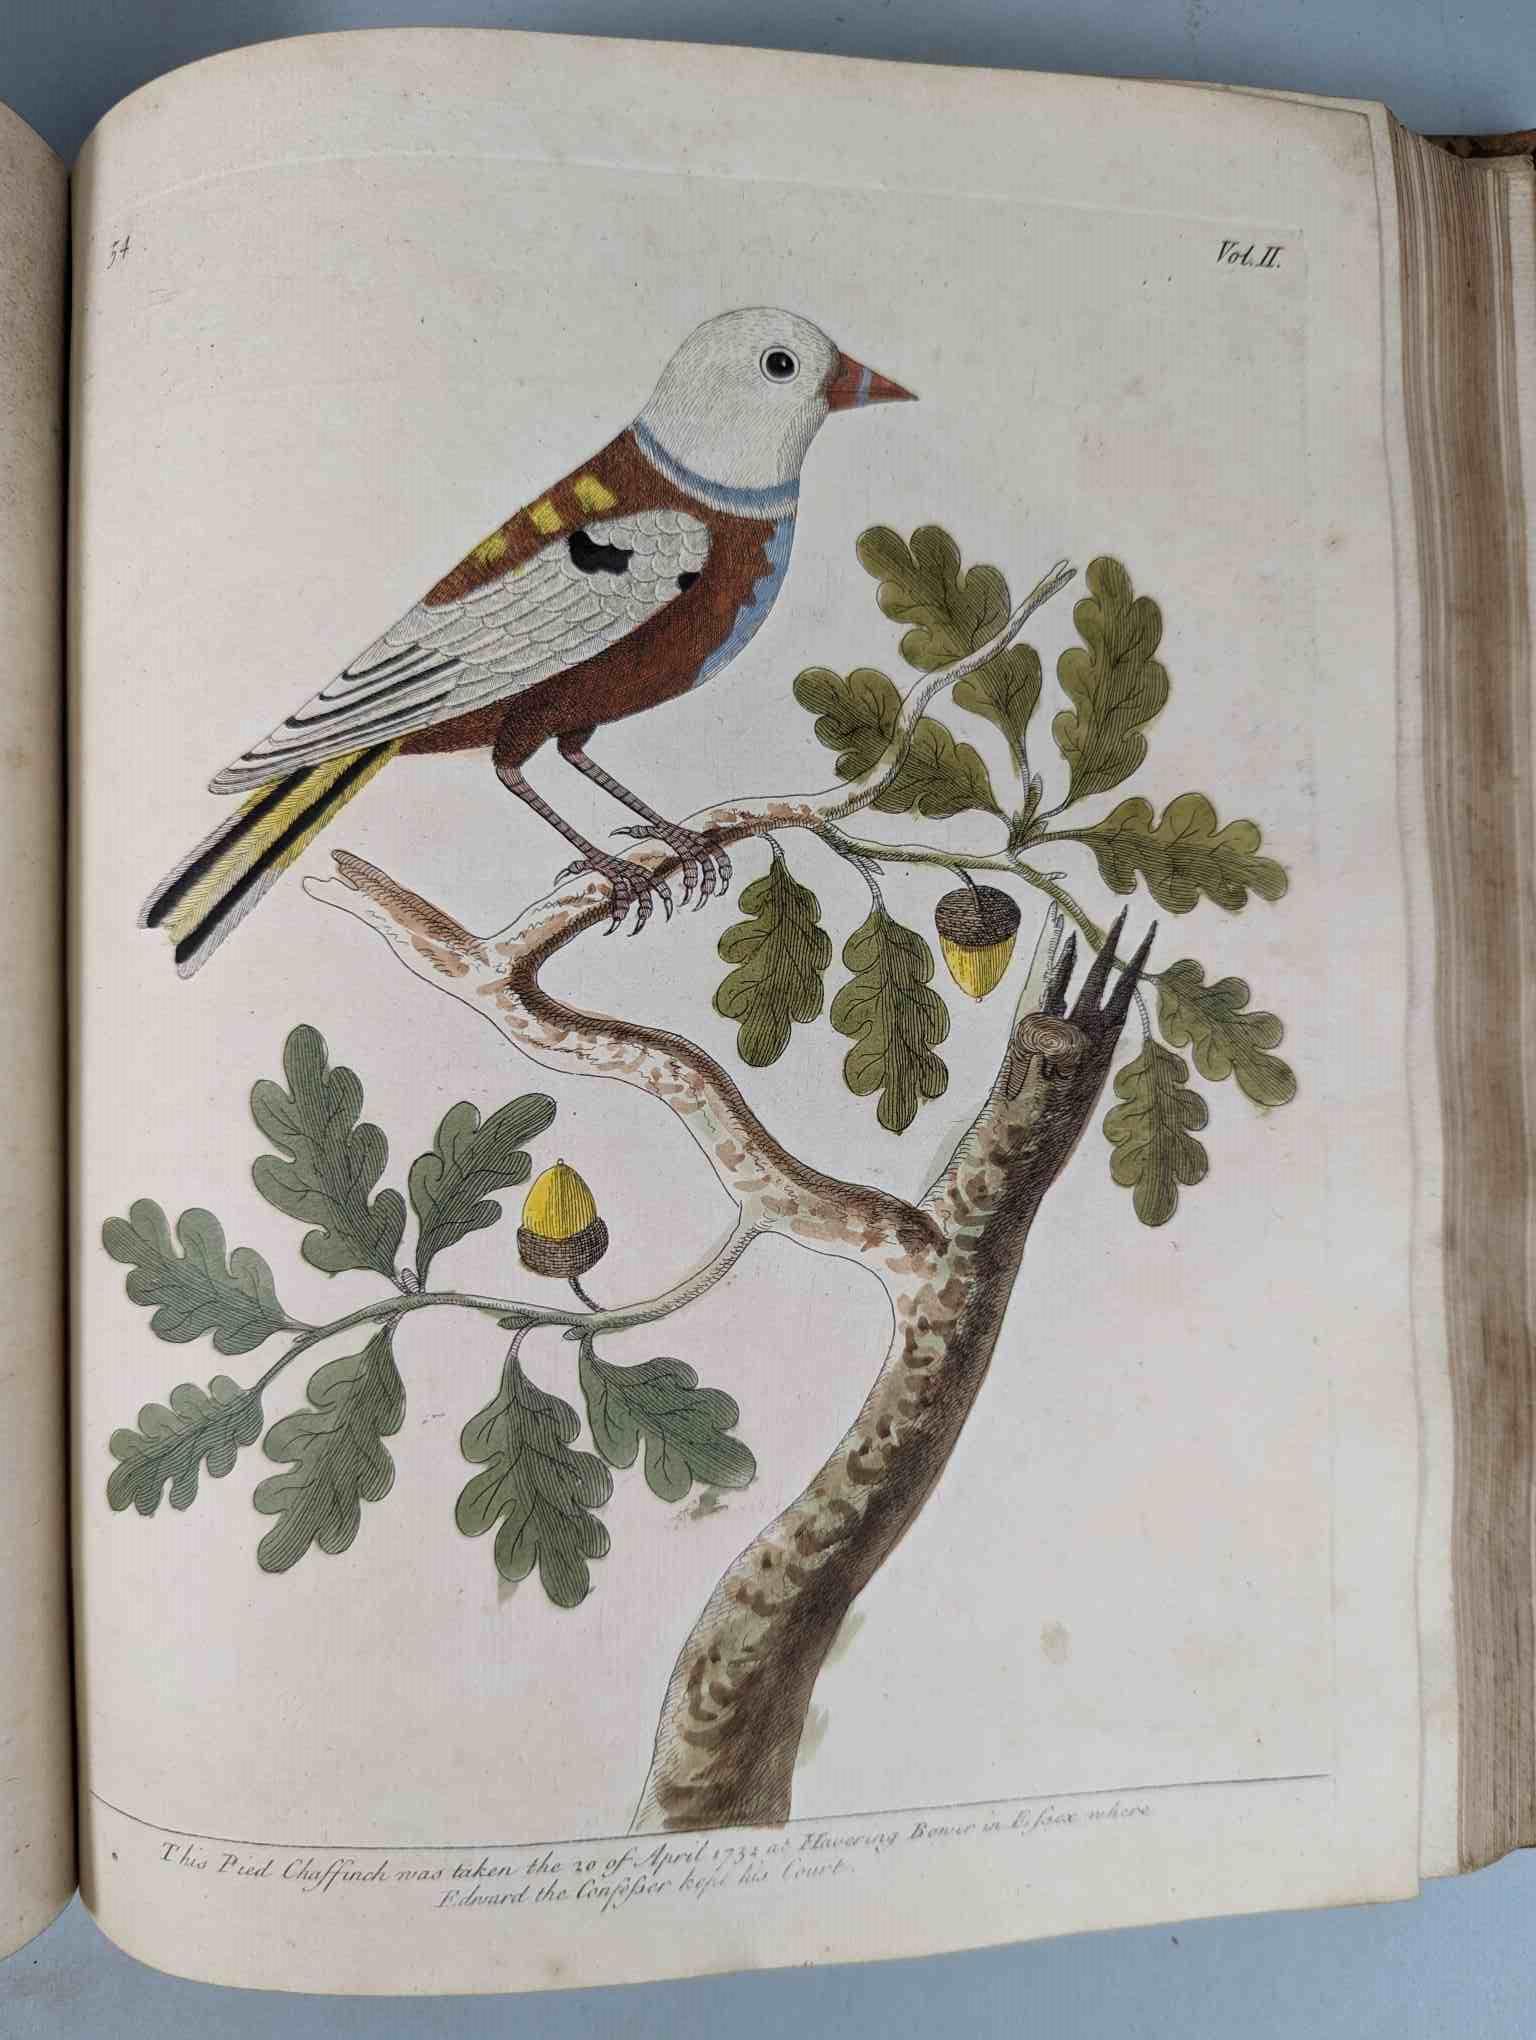 ALBIN, Eleazar. A Natural History of Birds, to which are added, Notes and Observations by W. - Image 158 of 208